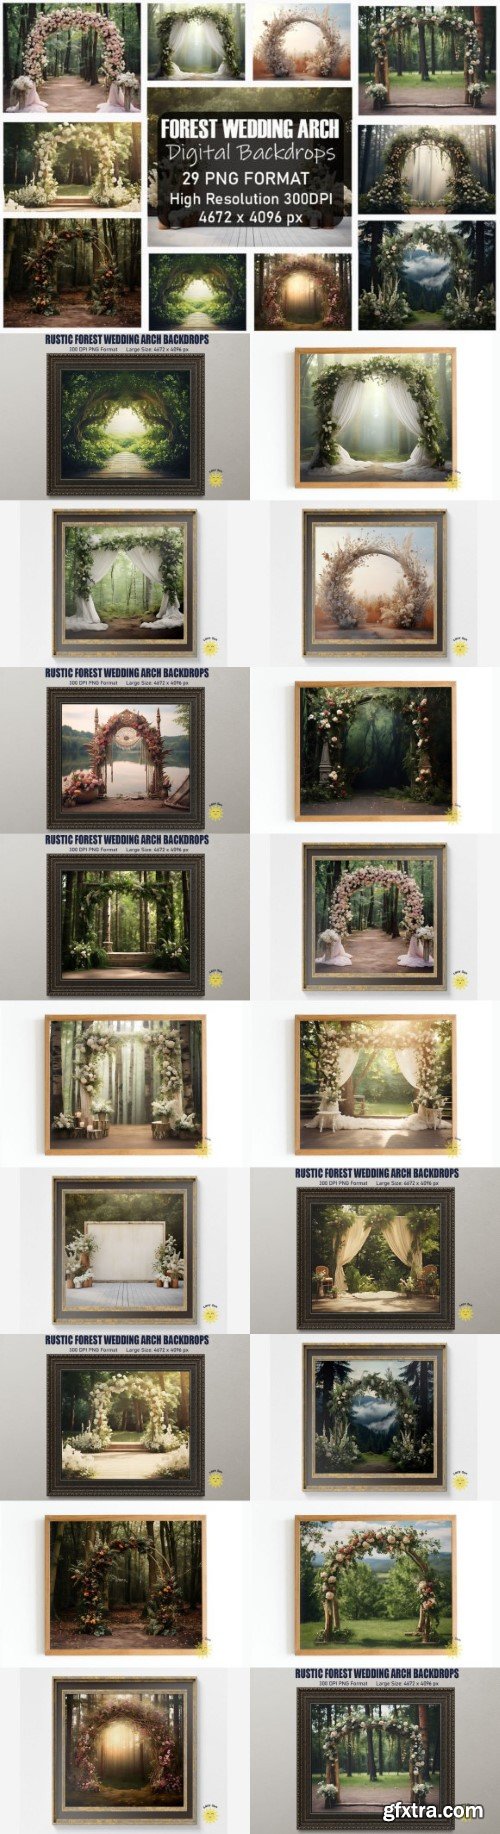 Rustic Forest Wedding Arch Backdrops